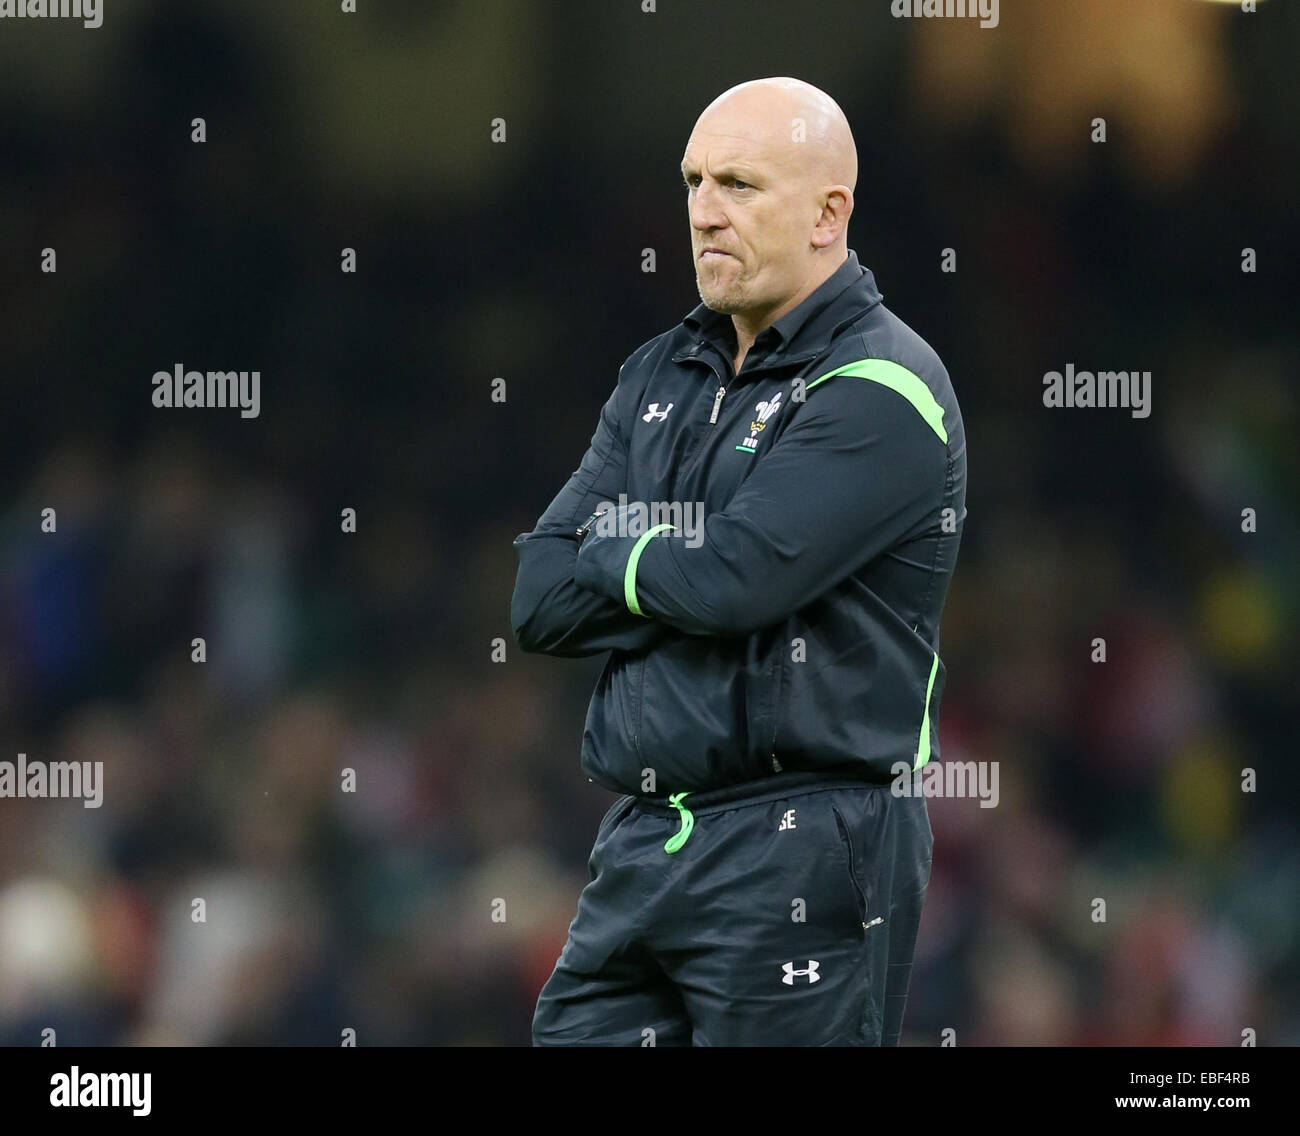 Cardiff, UK. 29th Nov, 2014. Wales defence coach Shaun Edwards - Autumn Internationals - Wales vs South Africa - Millennium Stadium - Cardiff - Wales - 29th November 2014 - Picture Simon Bellis/Sportimage. Credit:  csm/Alamy Live News Stock Photo